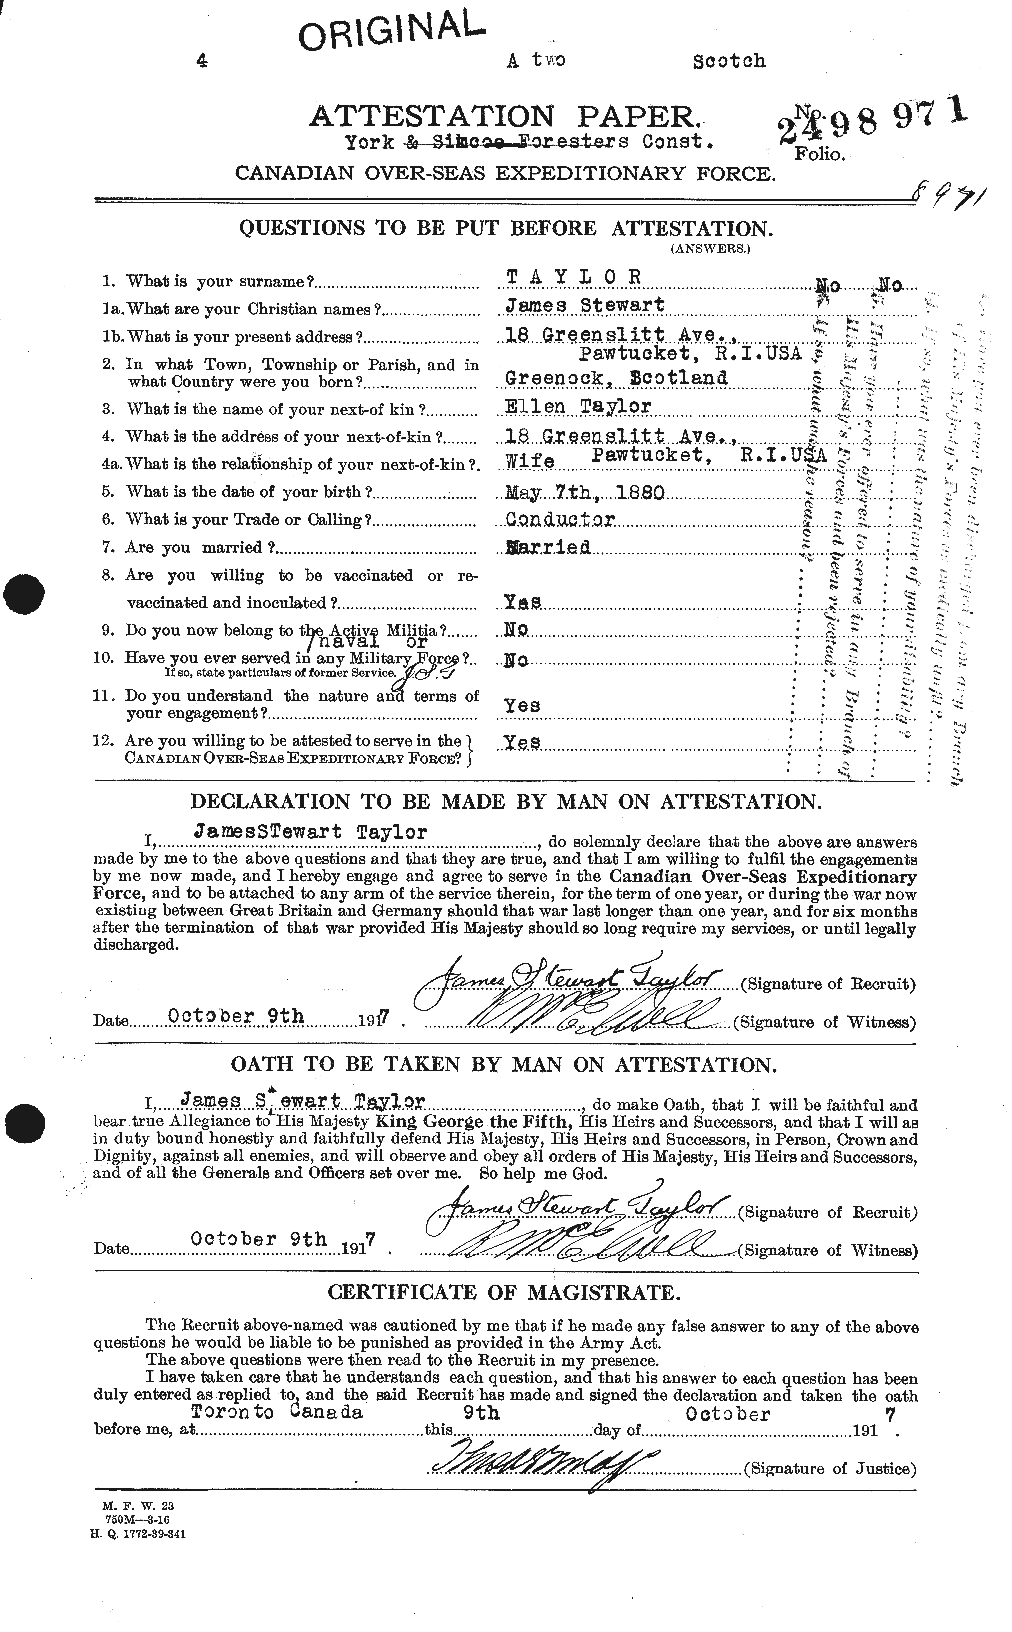 Personnel Records of the First World War - CEF 626956a